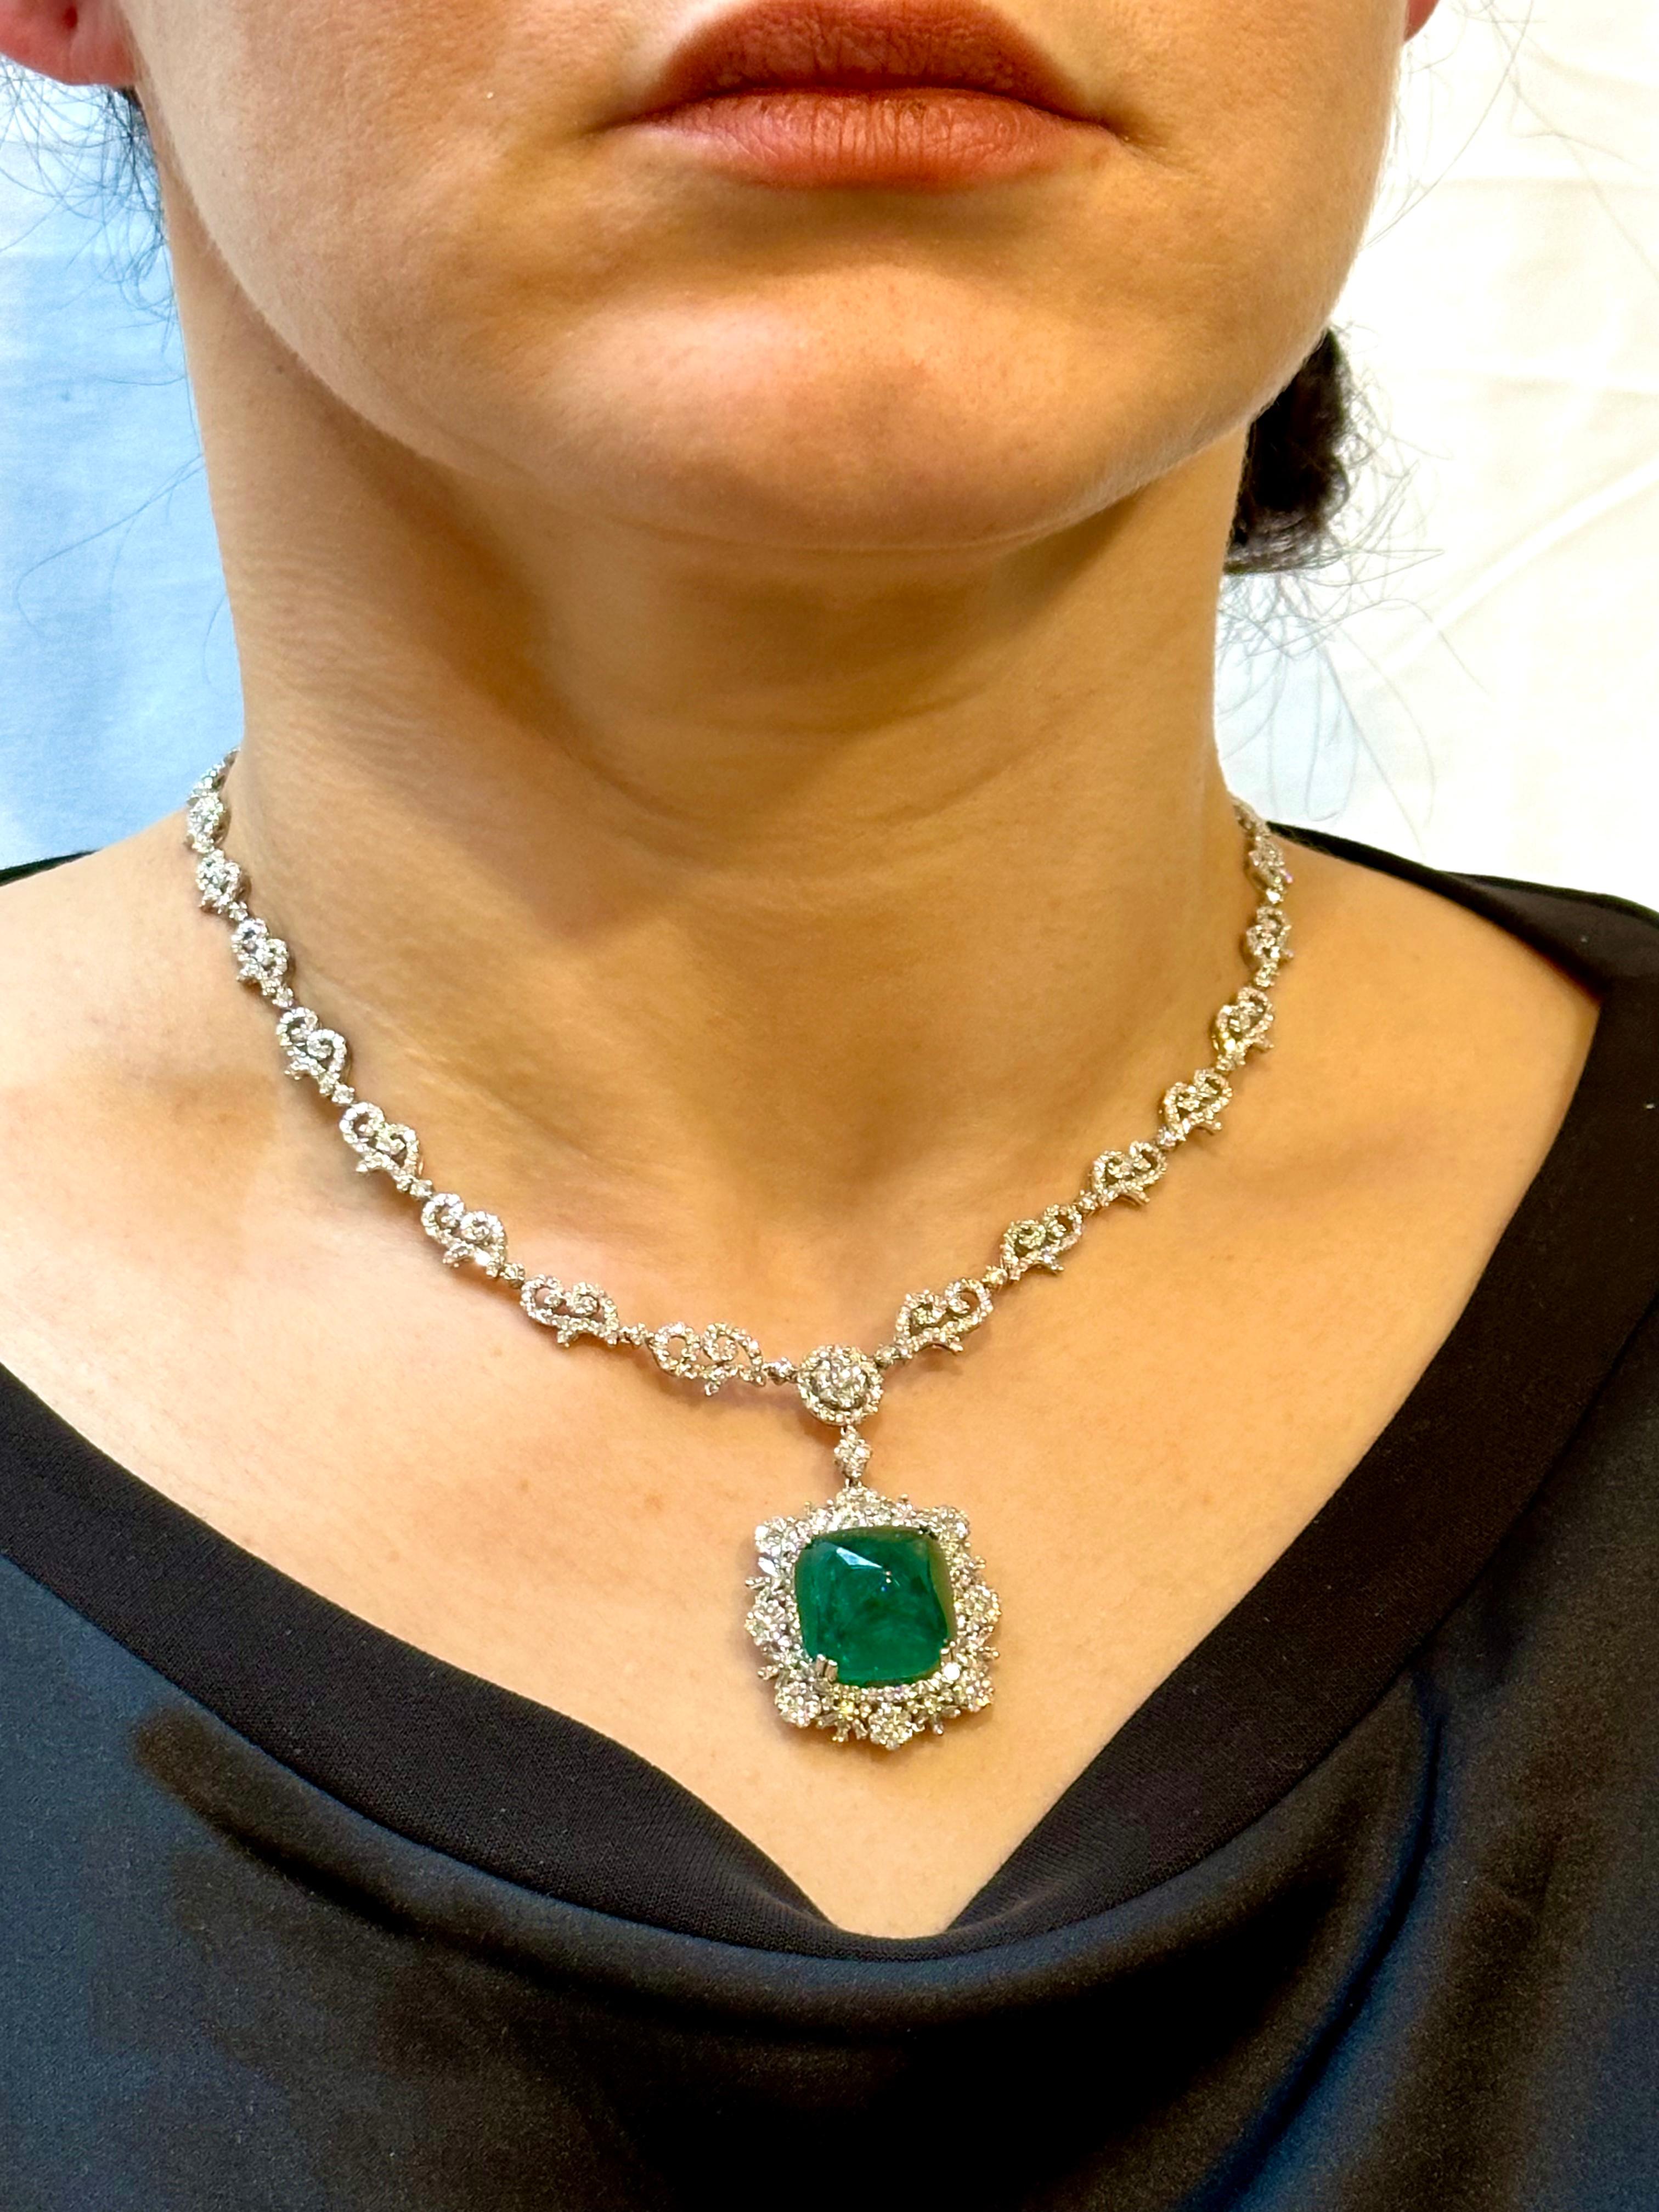 GIA 17 Ct Sugar Loaf Cabochon Colombian Emerald & 13 Ct Diamond Necklace 18KWG For Sale 4